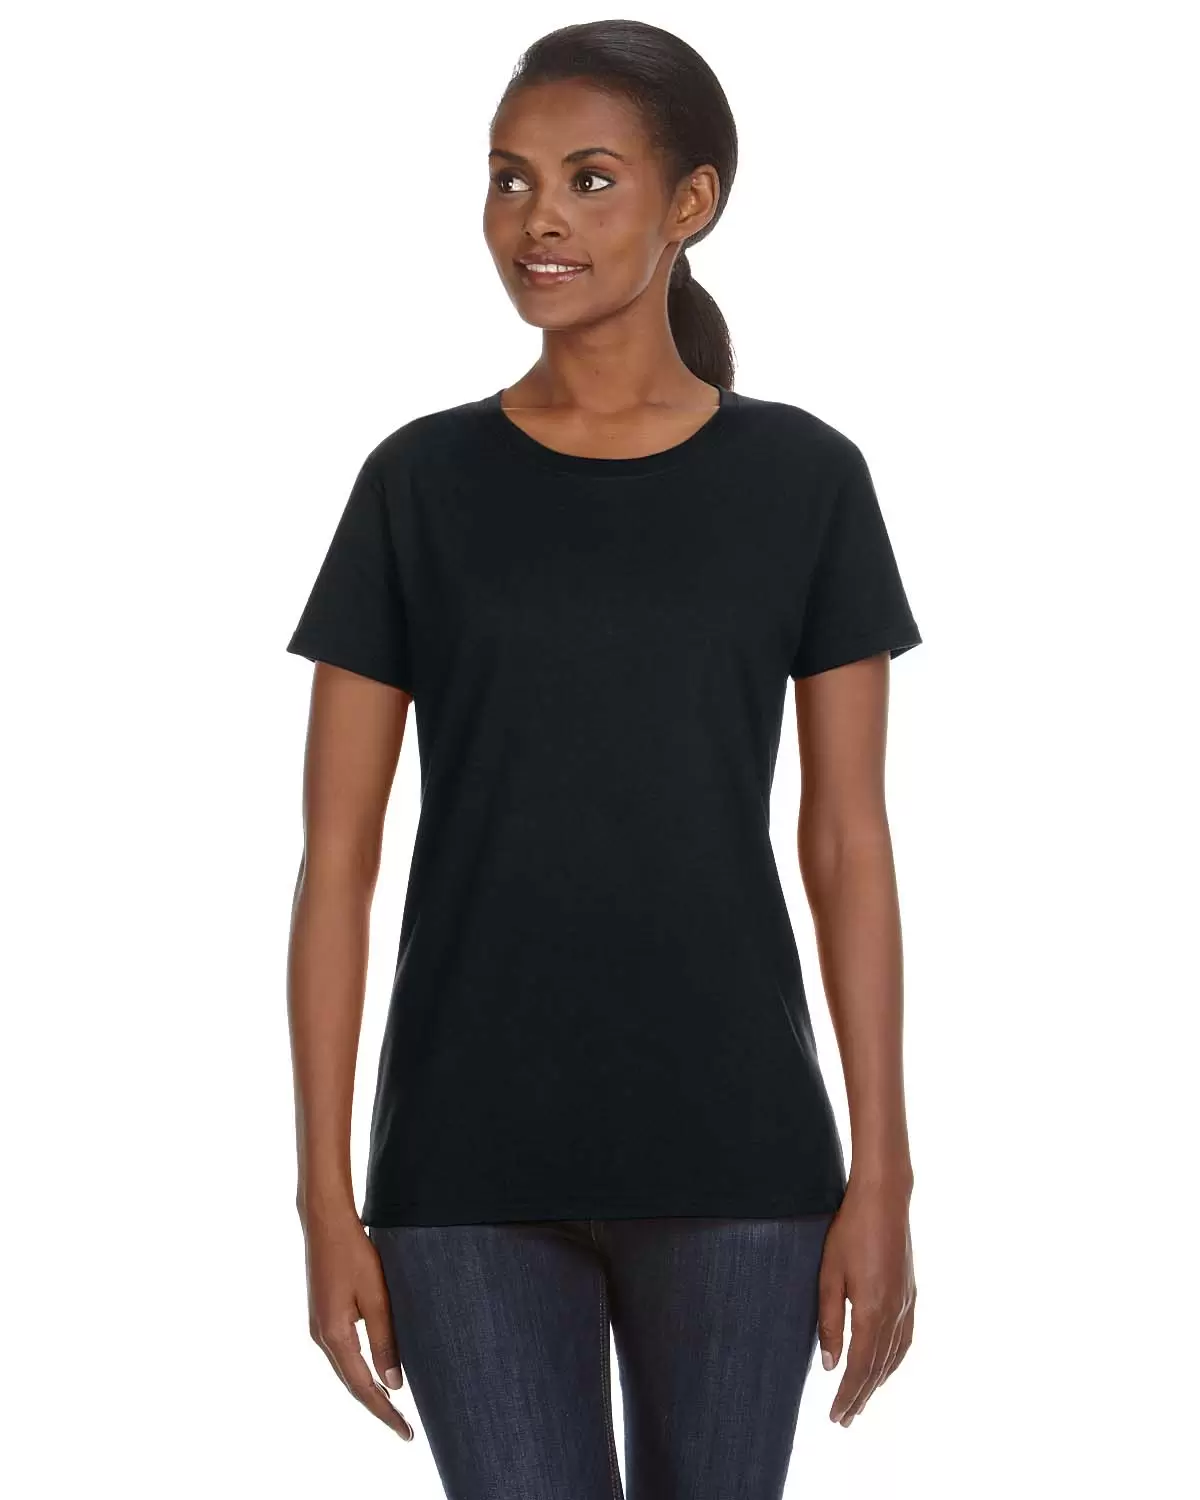 780L Anvil - Ladies' Midweight Short Sleeve T-Shirt - From $4.60